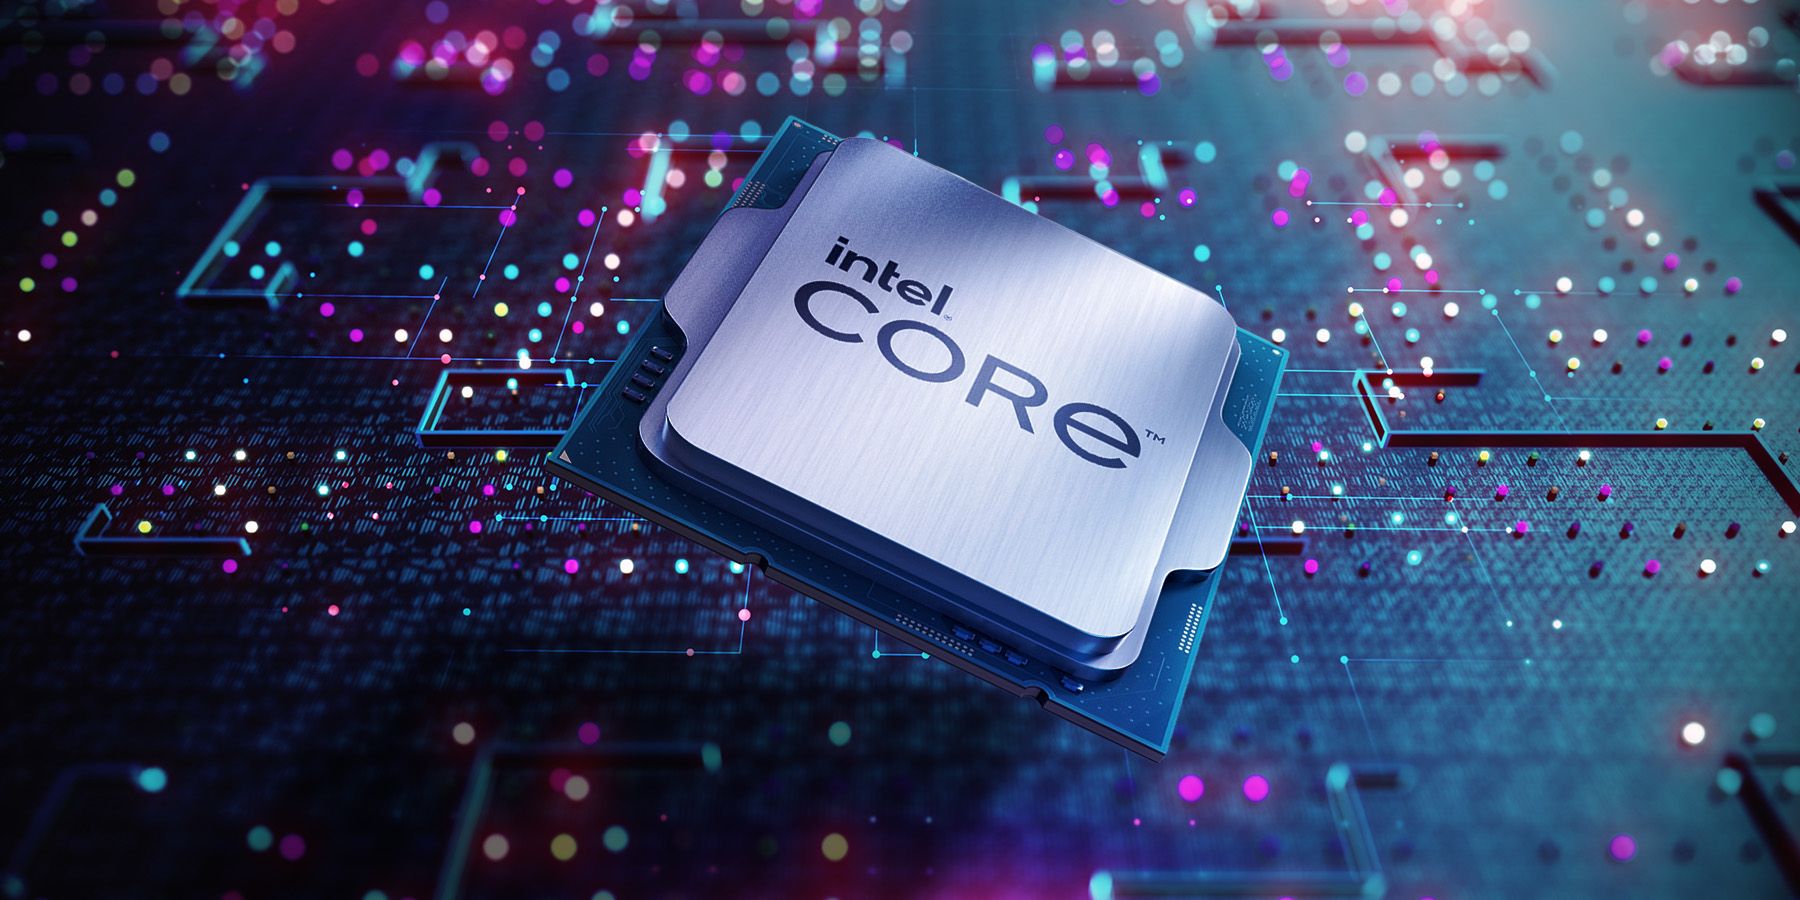 The Last Hope for Intel 14th Gen - Core i5-14600K Review